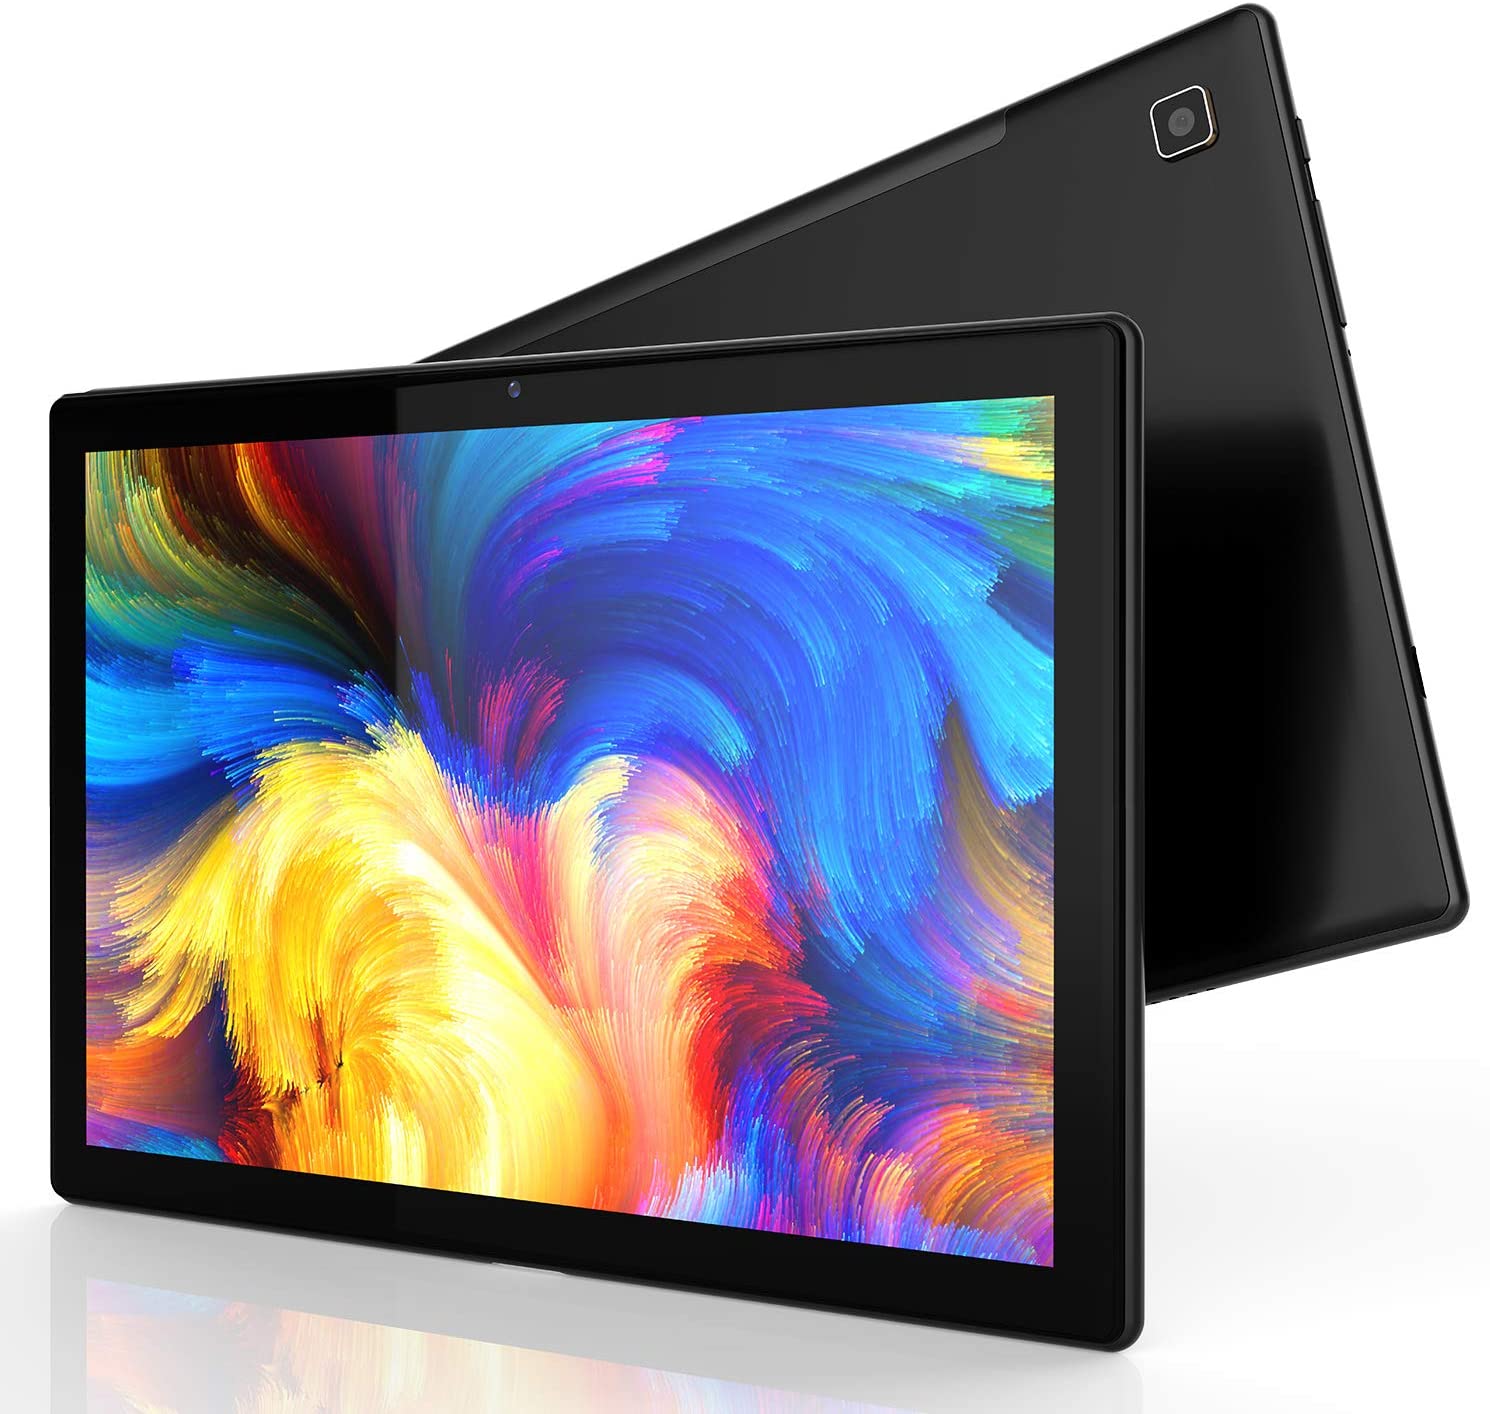 https://lappyvalley.com/storage/photos/1/s-1/BinBin-10-inch-Android-Tablet-1080p-Full-HD-Display-min.jpg